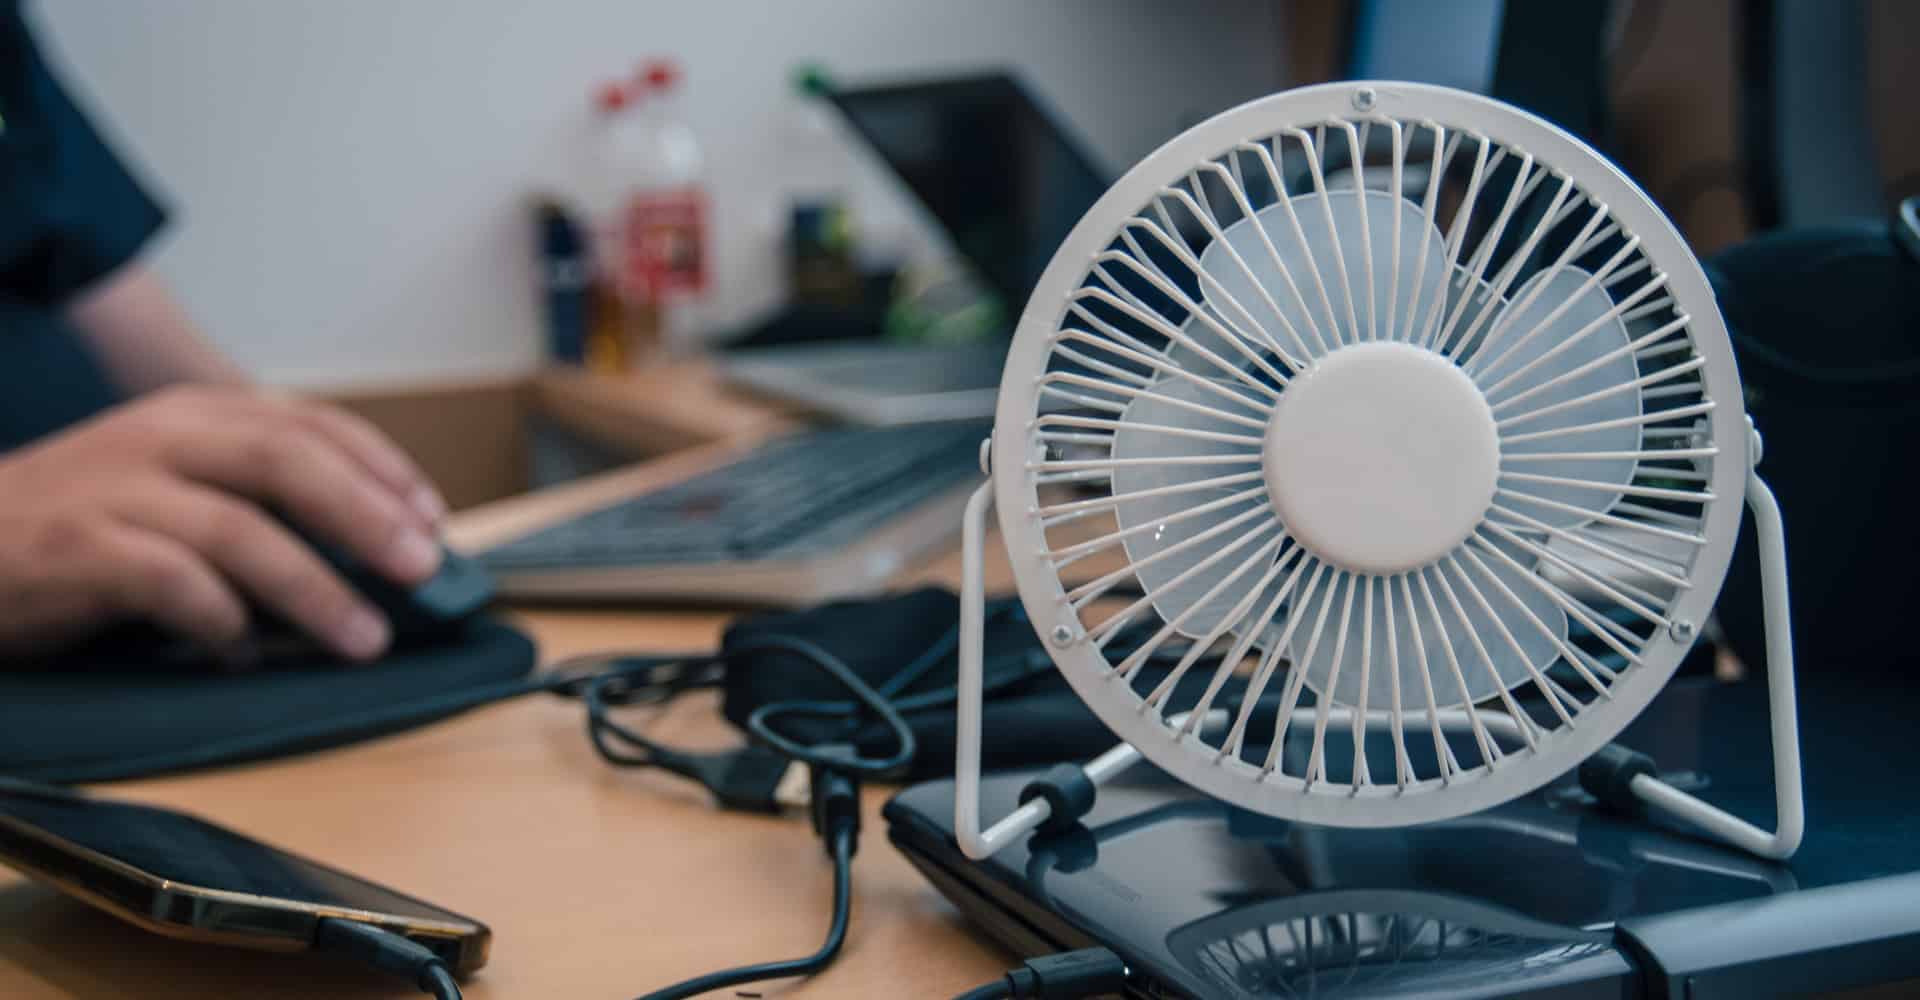 Bronze Funme 5 Inch USB Desk Fan Mini USB Tilting Desktop Cooling Fan with Metal Shell and Aluminium Blades ideal for PC Laptop Notebook All USB Device 